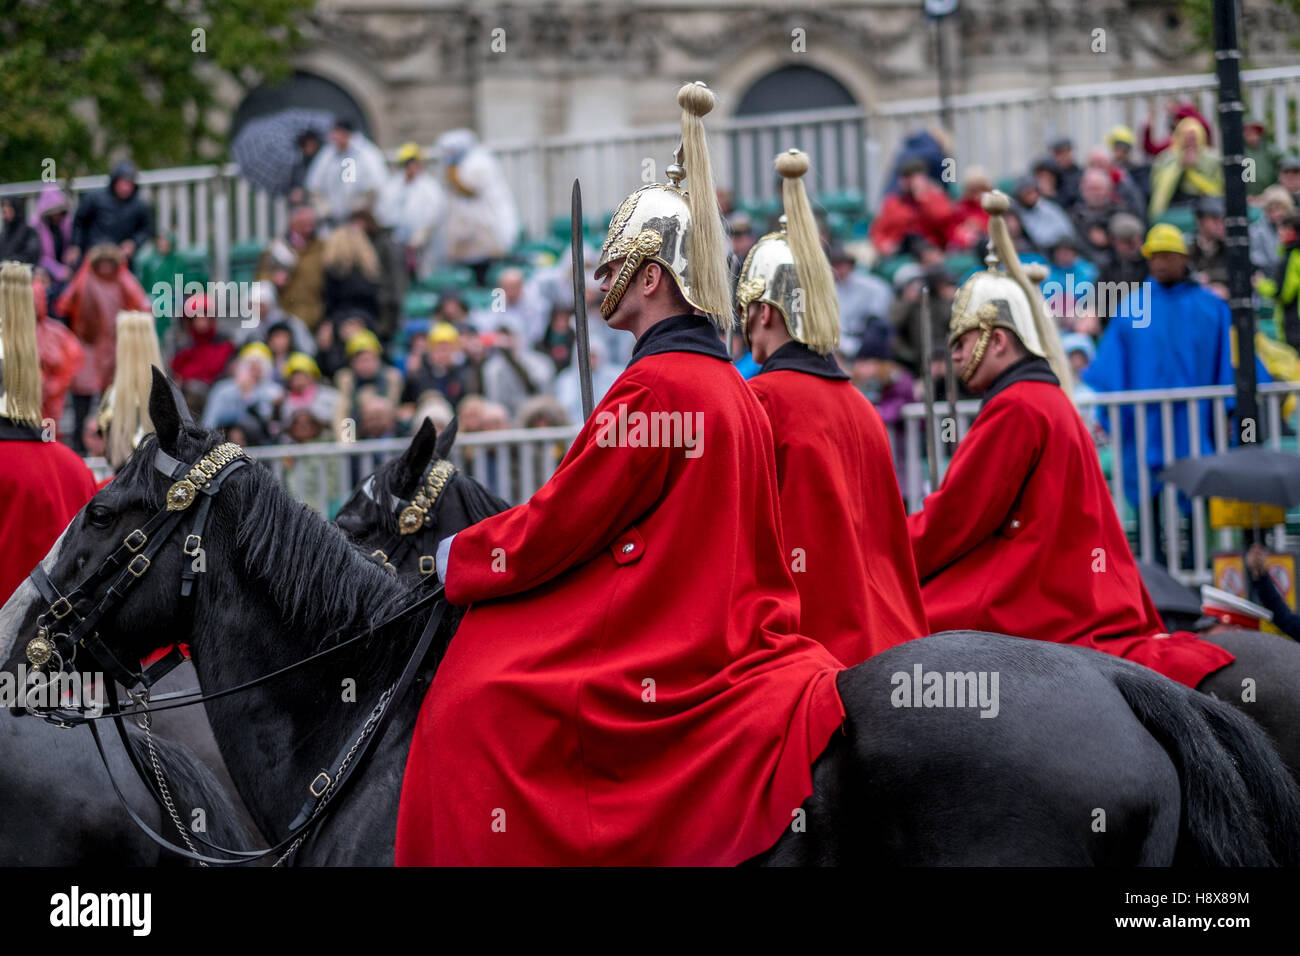 Lord Mayor's Show in London England November 2016 show's men on horseback with gold helmet wearing red cloaks.  Royalty. Stock Photo